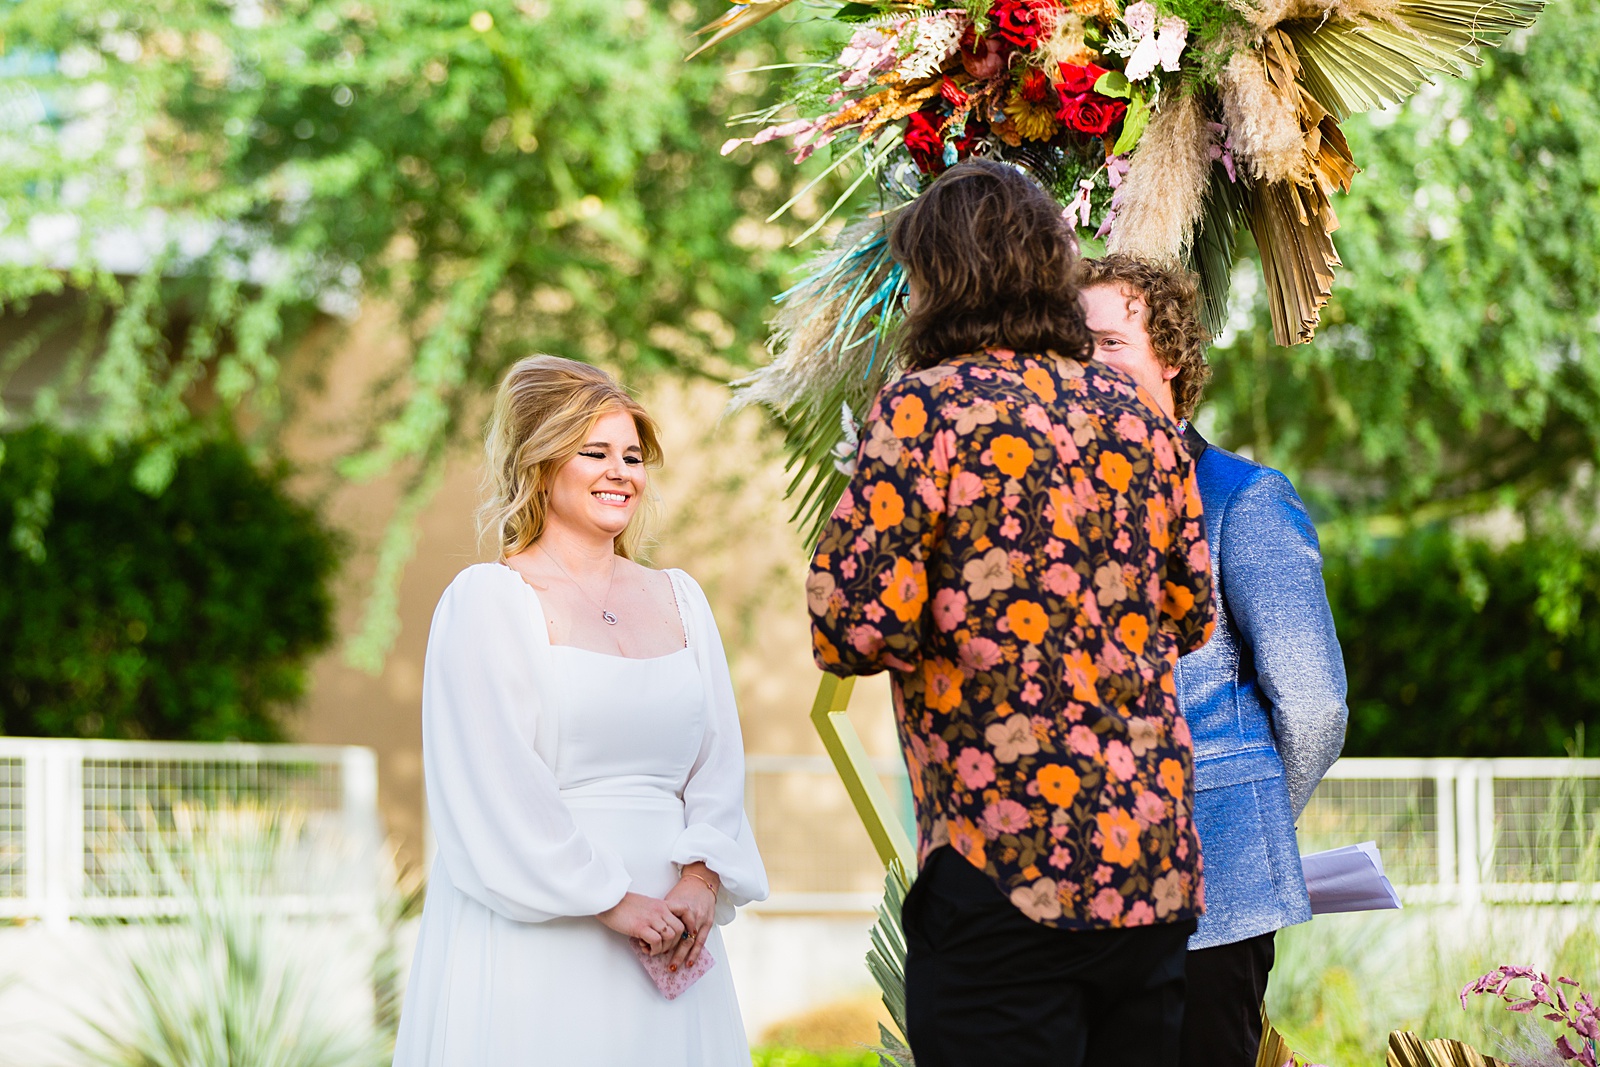 Bride looking at her groom during their wedding ceremony at Mountain Shadows Resort by Paradise Valley wedding photographer PMA Photography.